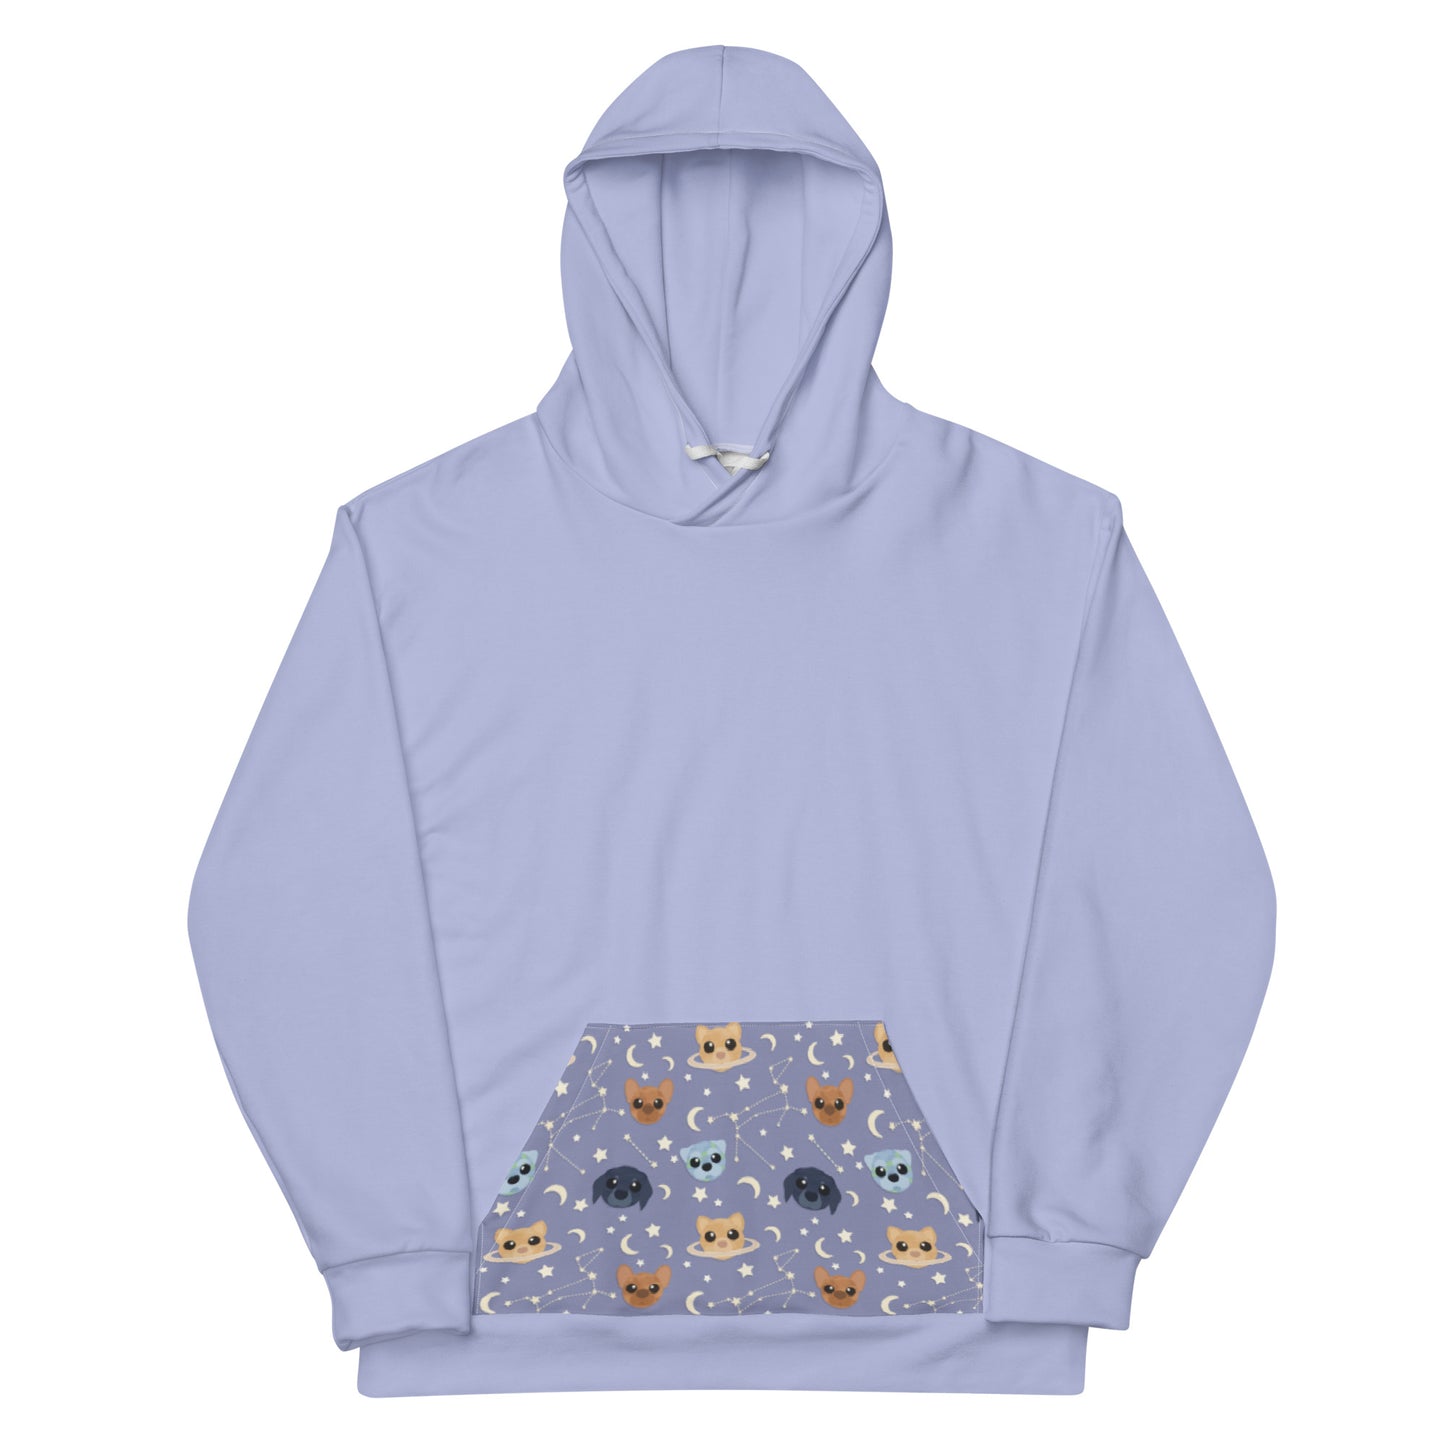 Astro-Mutts Unisex Pullover Hoodie - Boogs & Boop